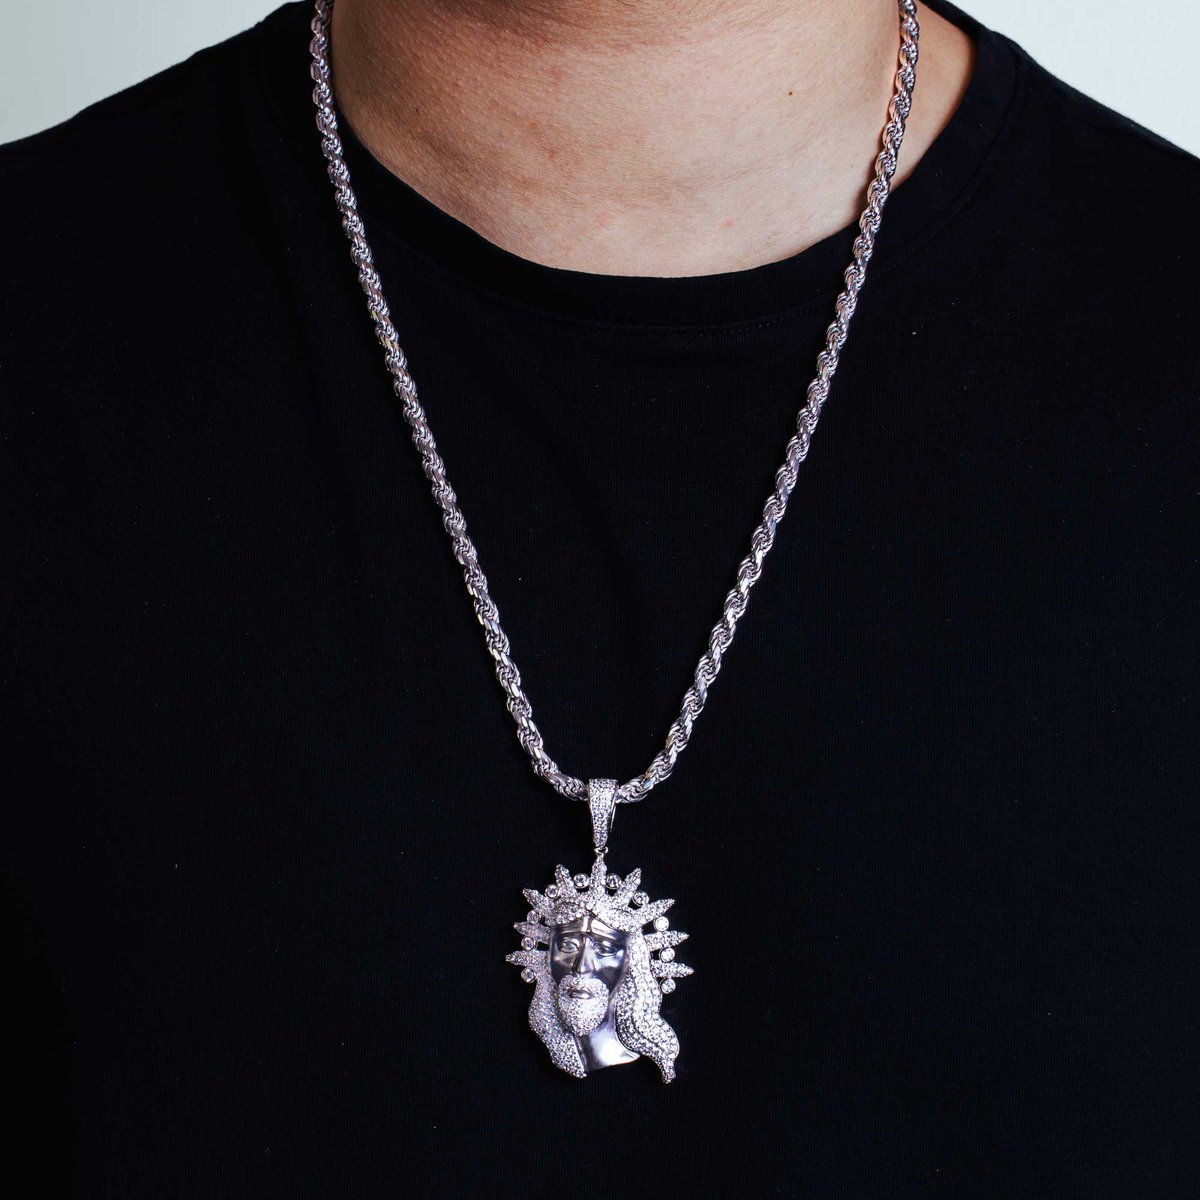 Snag these stunning sterling silver men's pendants decked out in sparkling cubic zirconia stones before they vanish again! Don't let your customers down - grab this essential piece now!
#menspendant #wholesalejewelry #wholesalesilver #925silver #mensaccessories #forhim #pendant